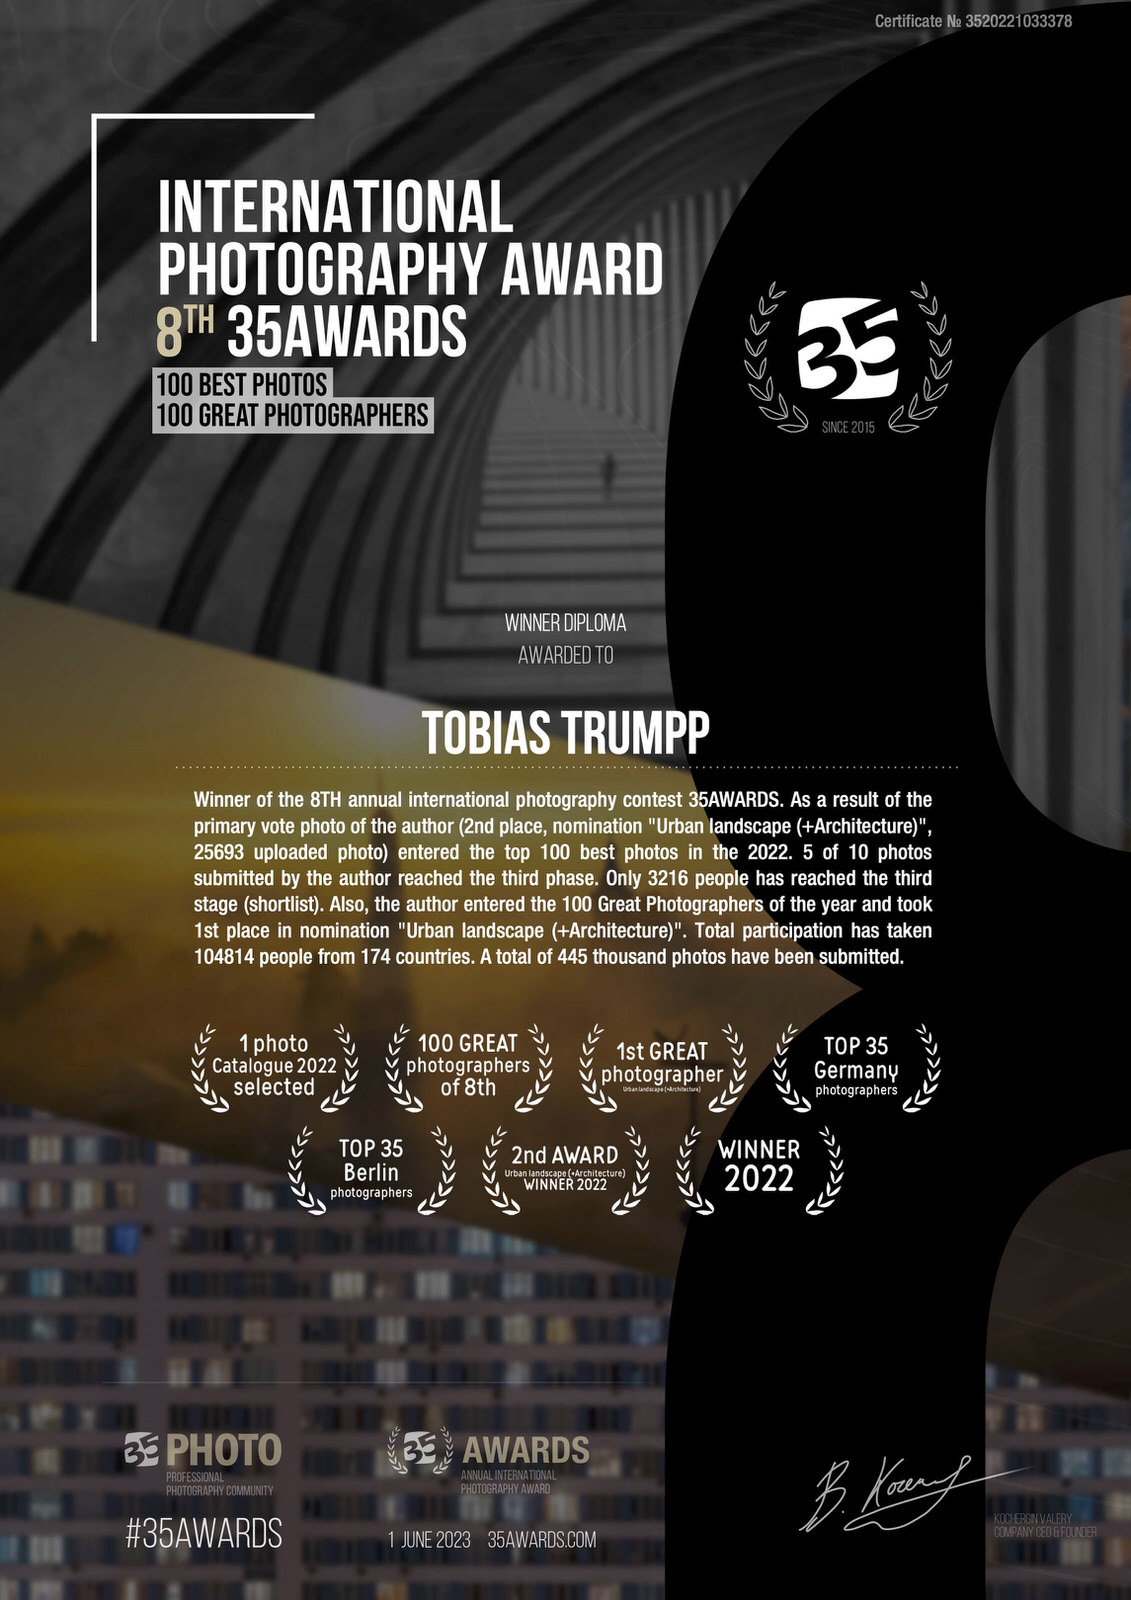 fine art architecture certificate of the 2022 35 awards by tobias trumpp